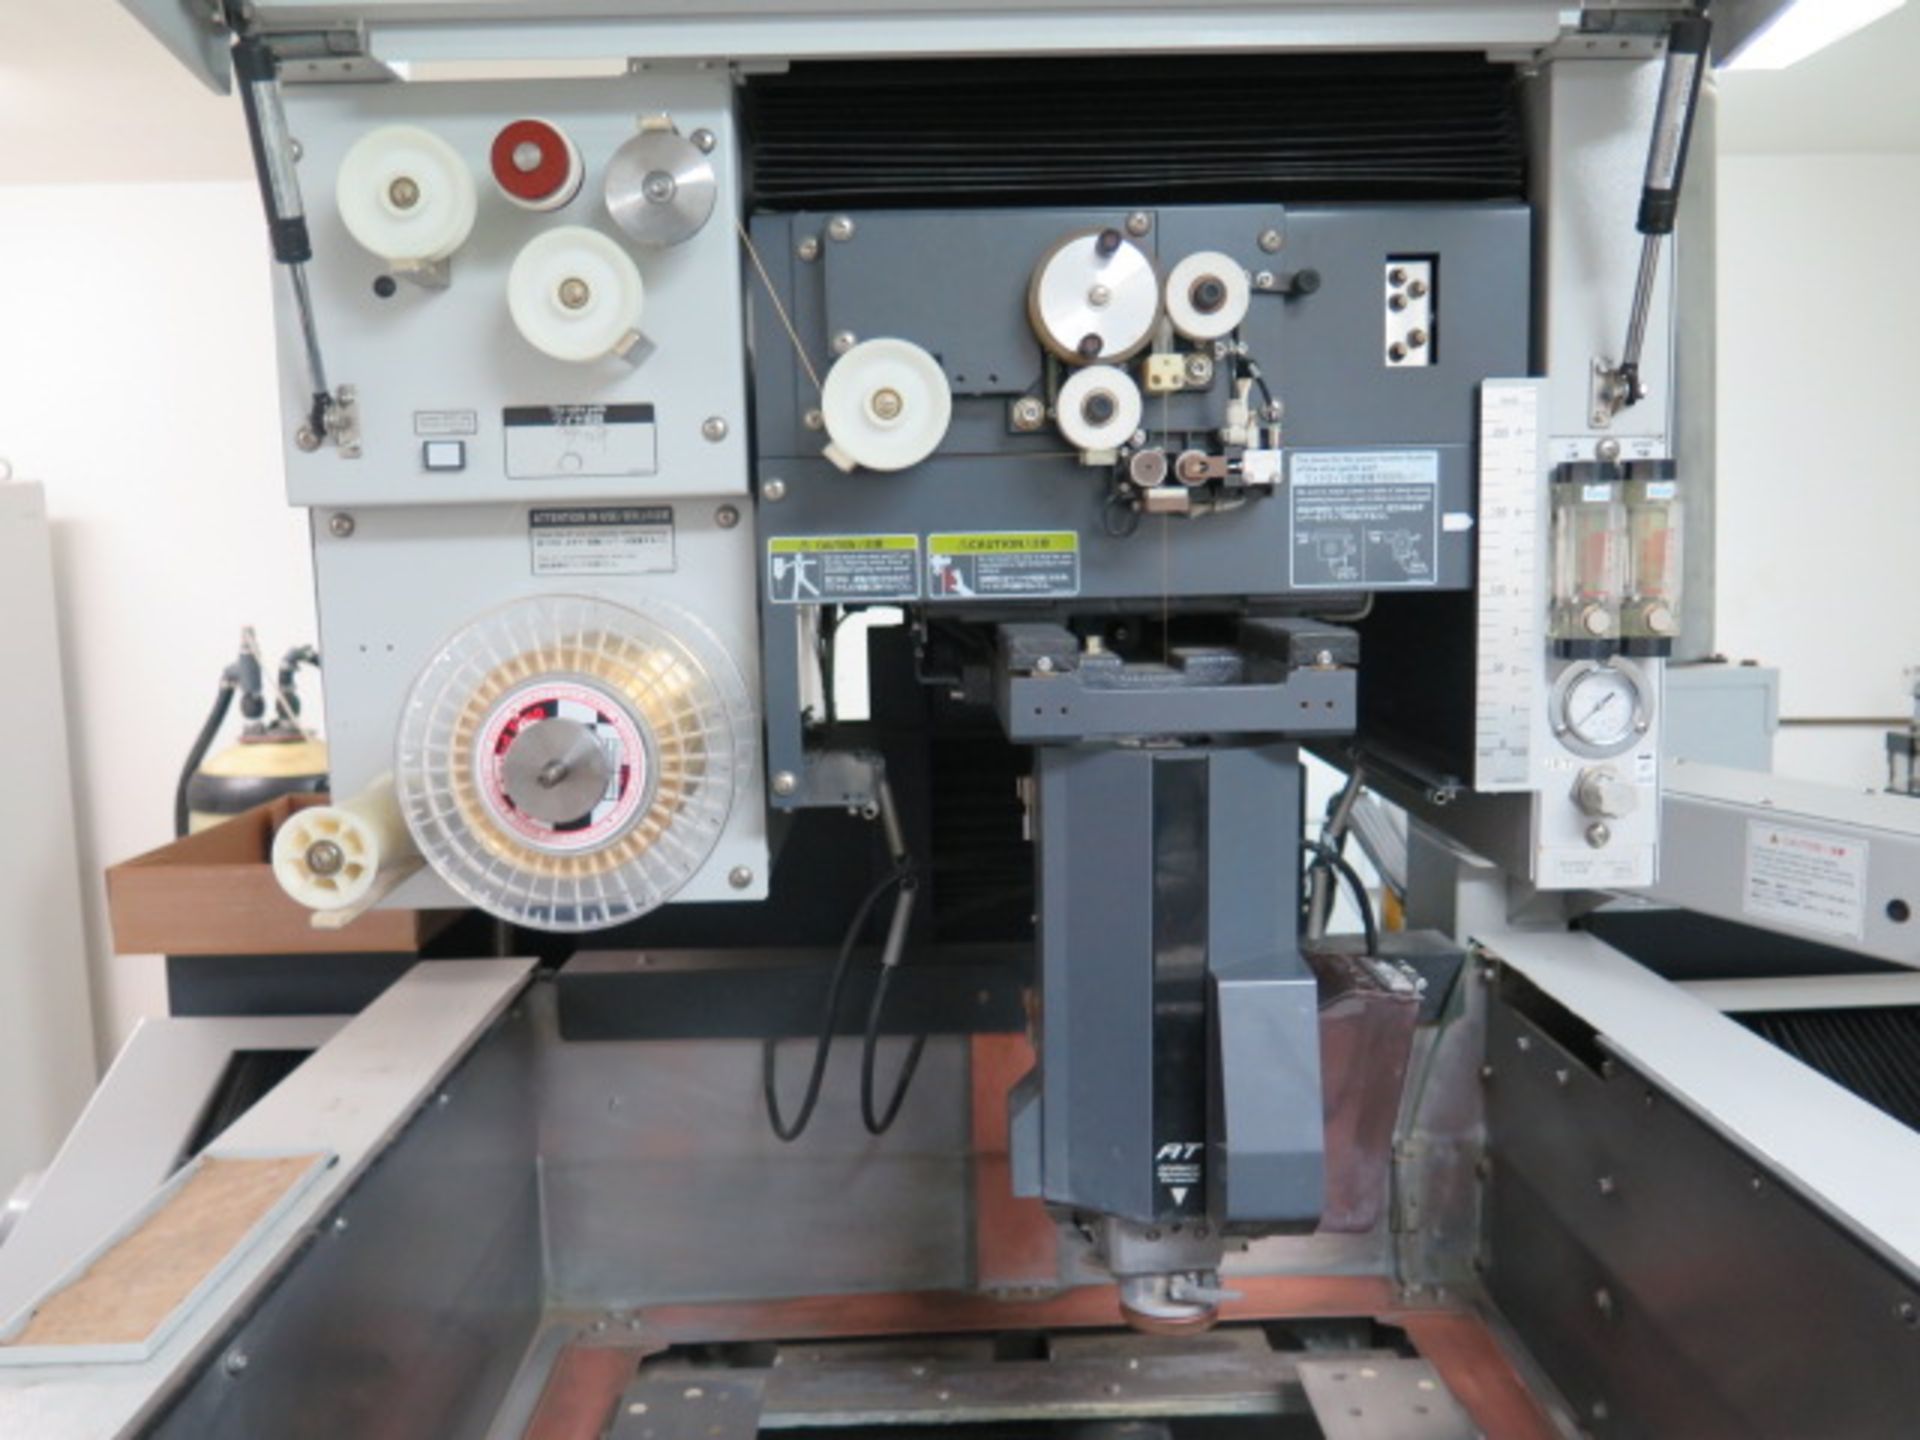 2014 Mitsubishi MD+ PRO III mdl. MV1200S CNC Wire EDM s/n 54D1M091 w/ Mitsubishi M700, SOLD AS IS - Image 6 of 27